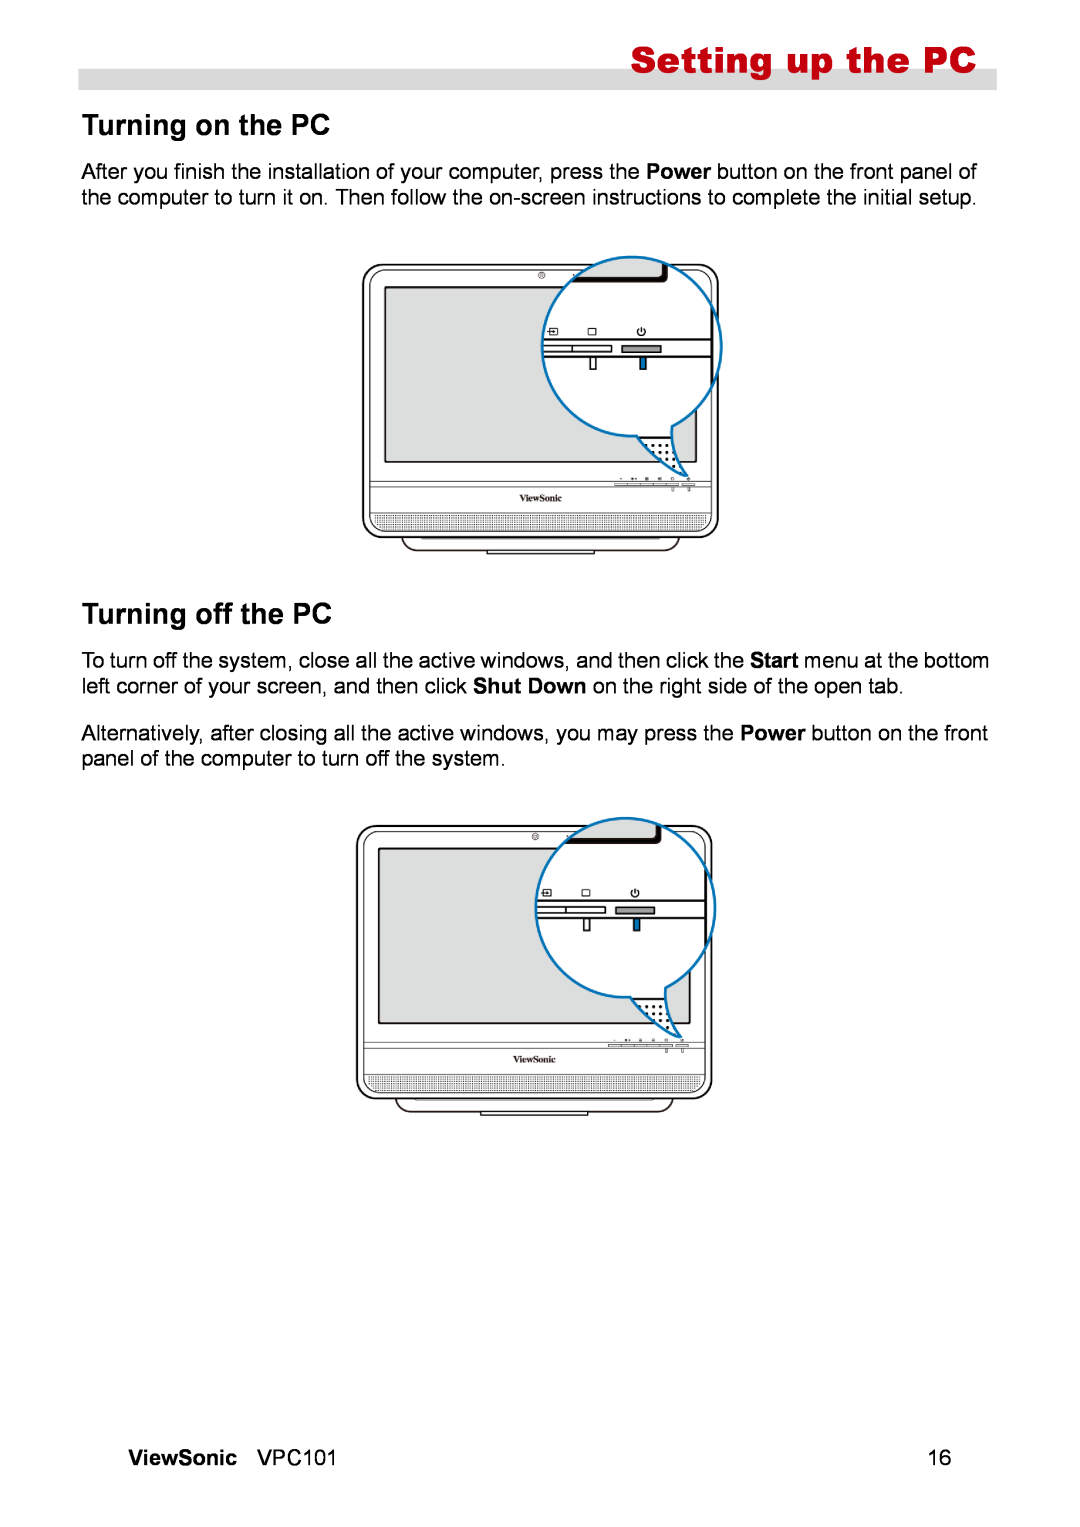 ViewSonic VPC101 manual Turning on the PC, Turning off the PC, Setting up the PC 